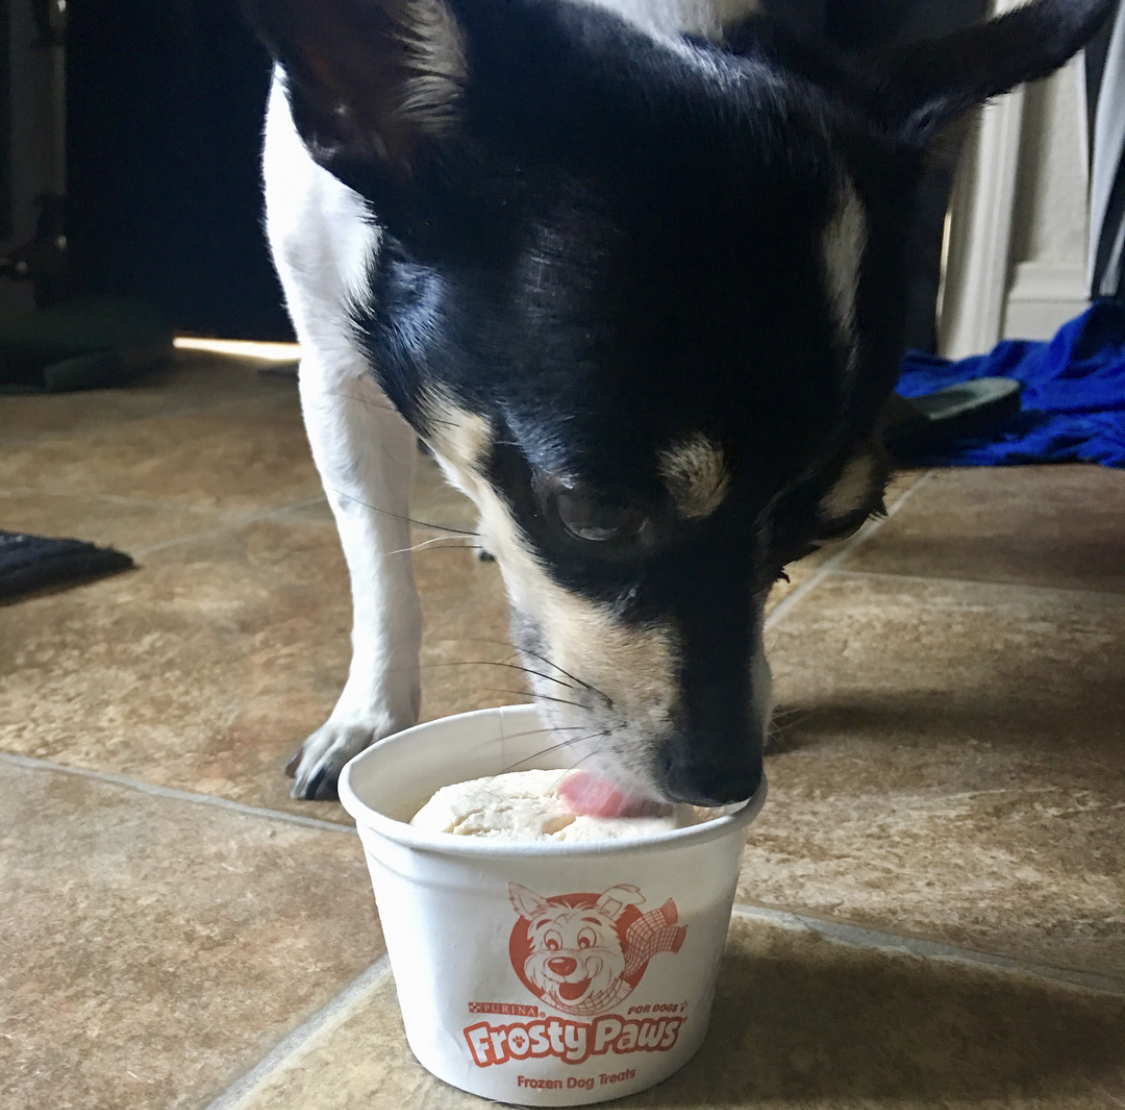 A Chihuahua licking the icecream in a cup on the floor